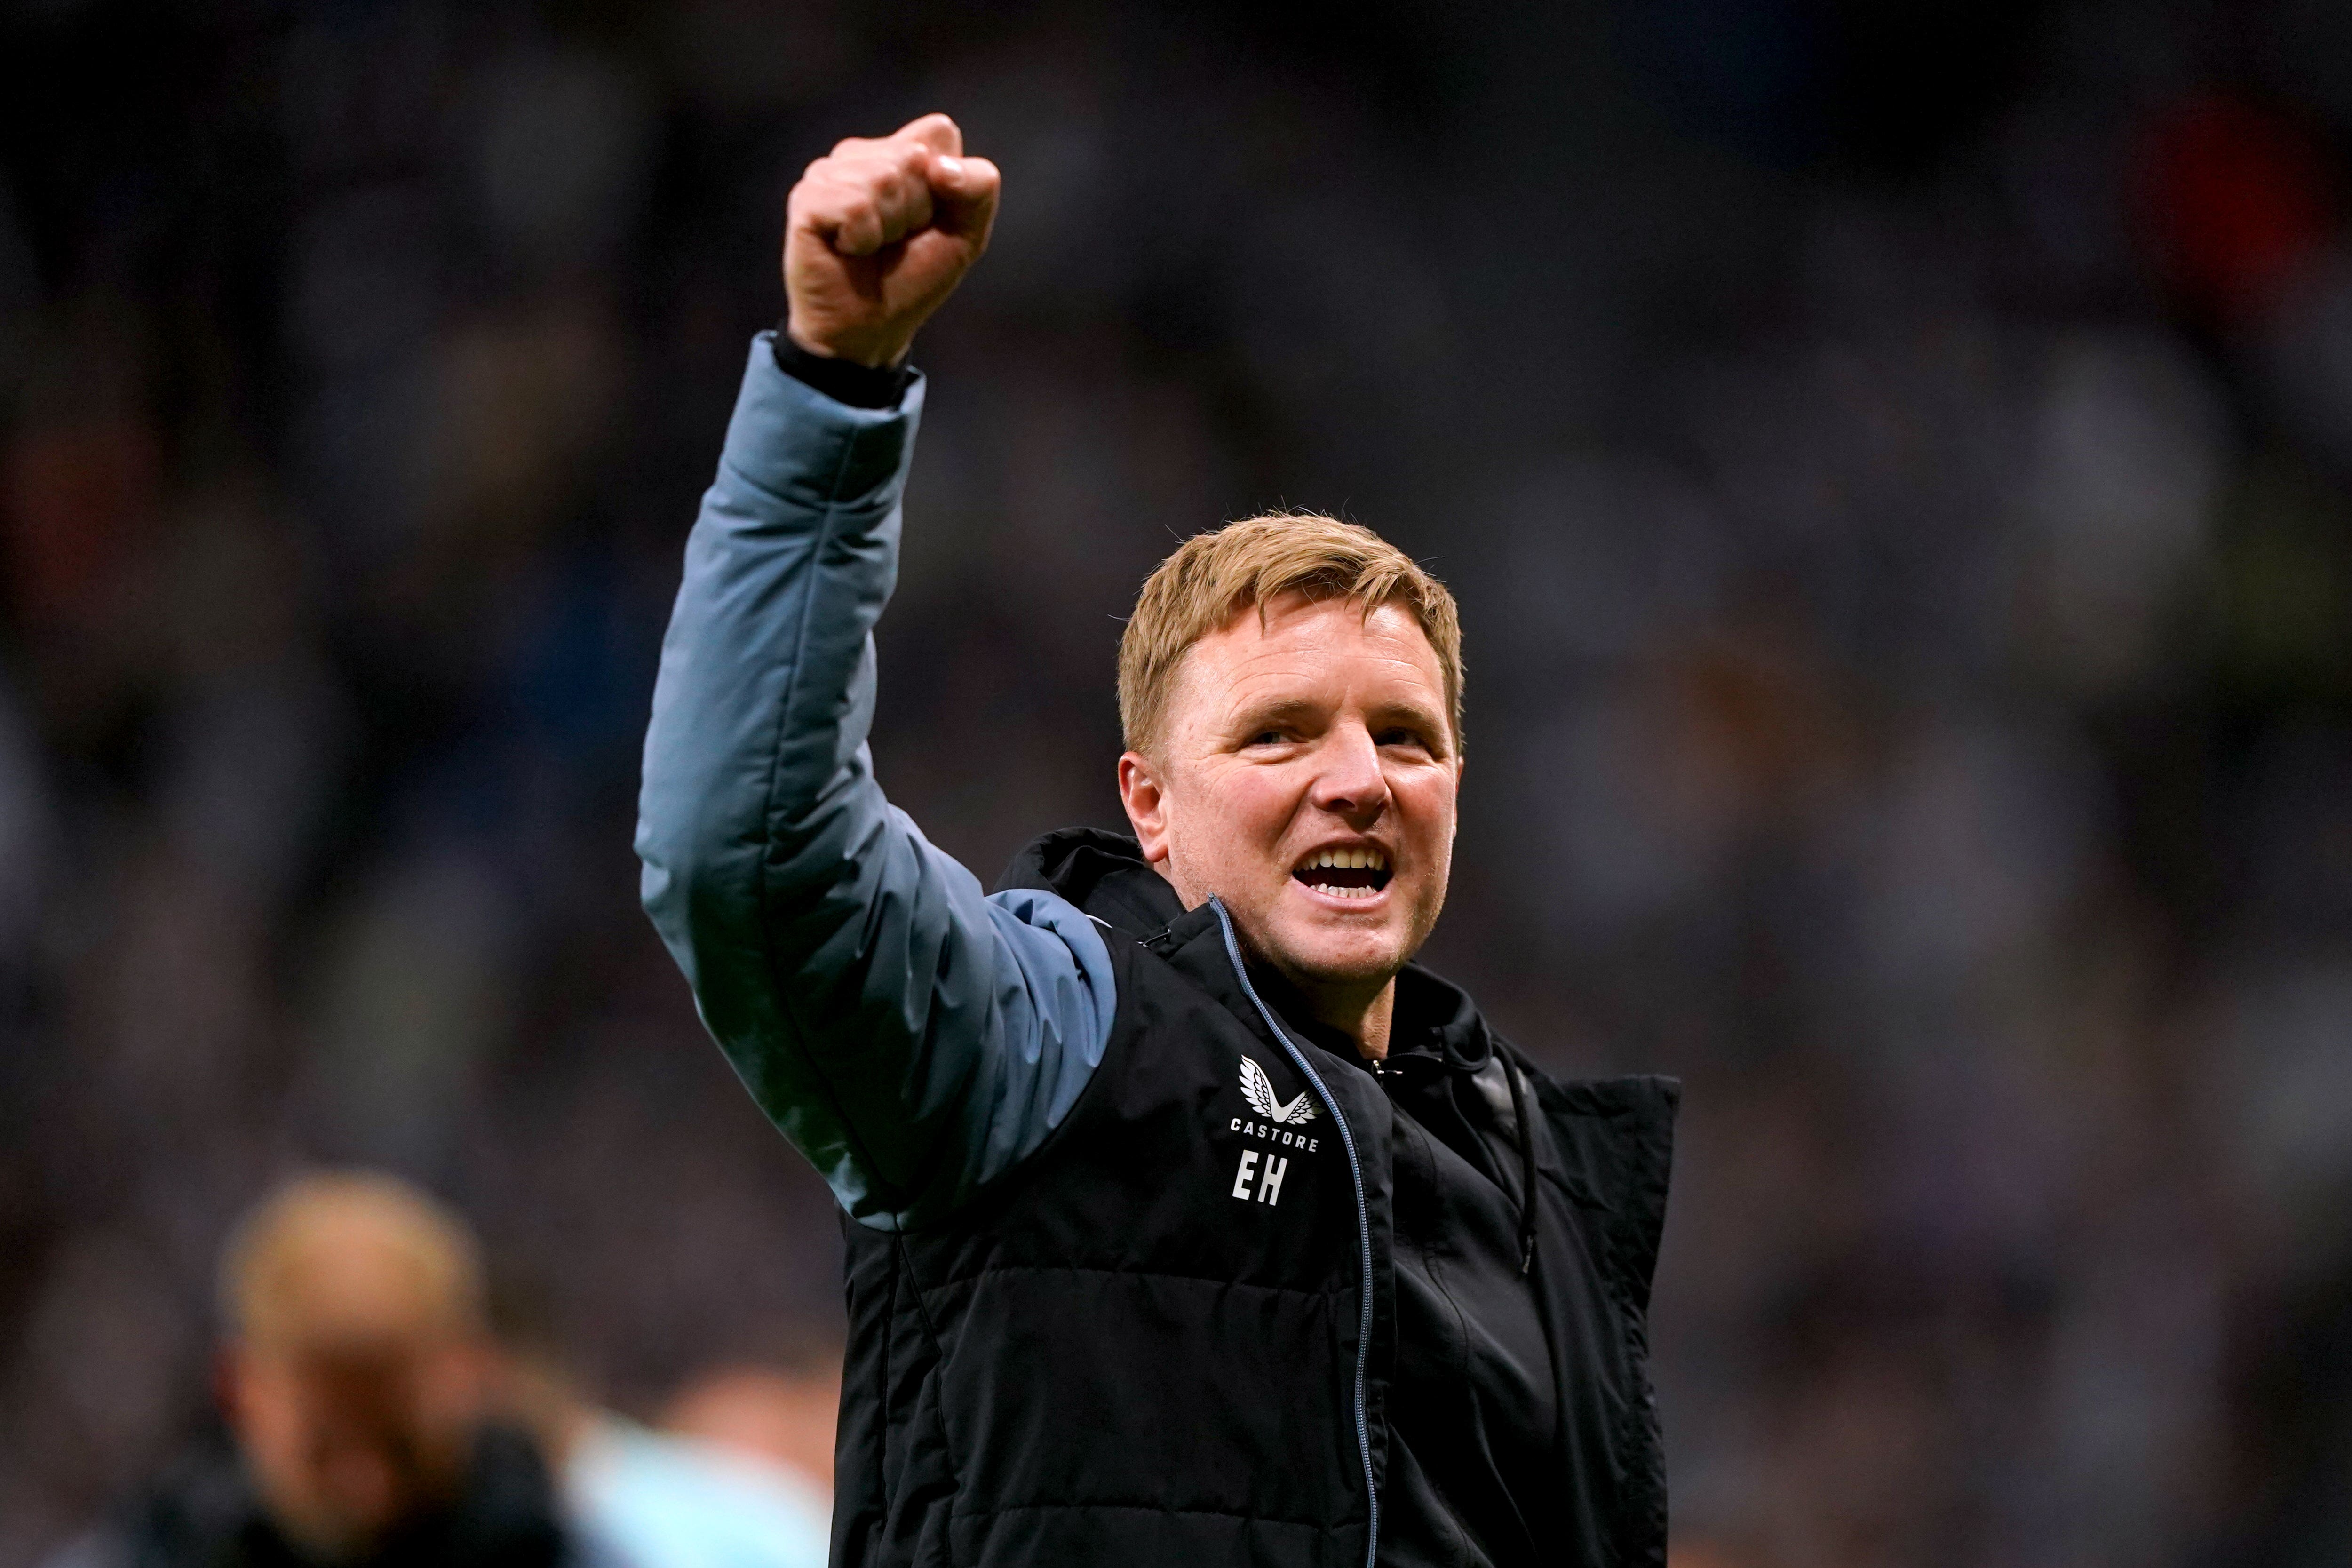 Newcastle boss Eddie Howe defied the odds to lead them into the Champions League